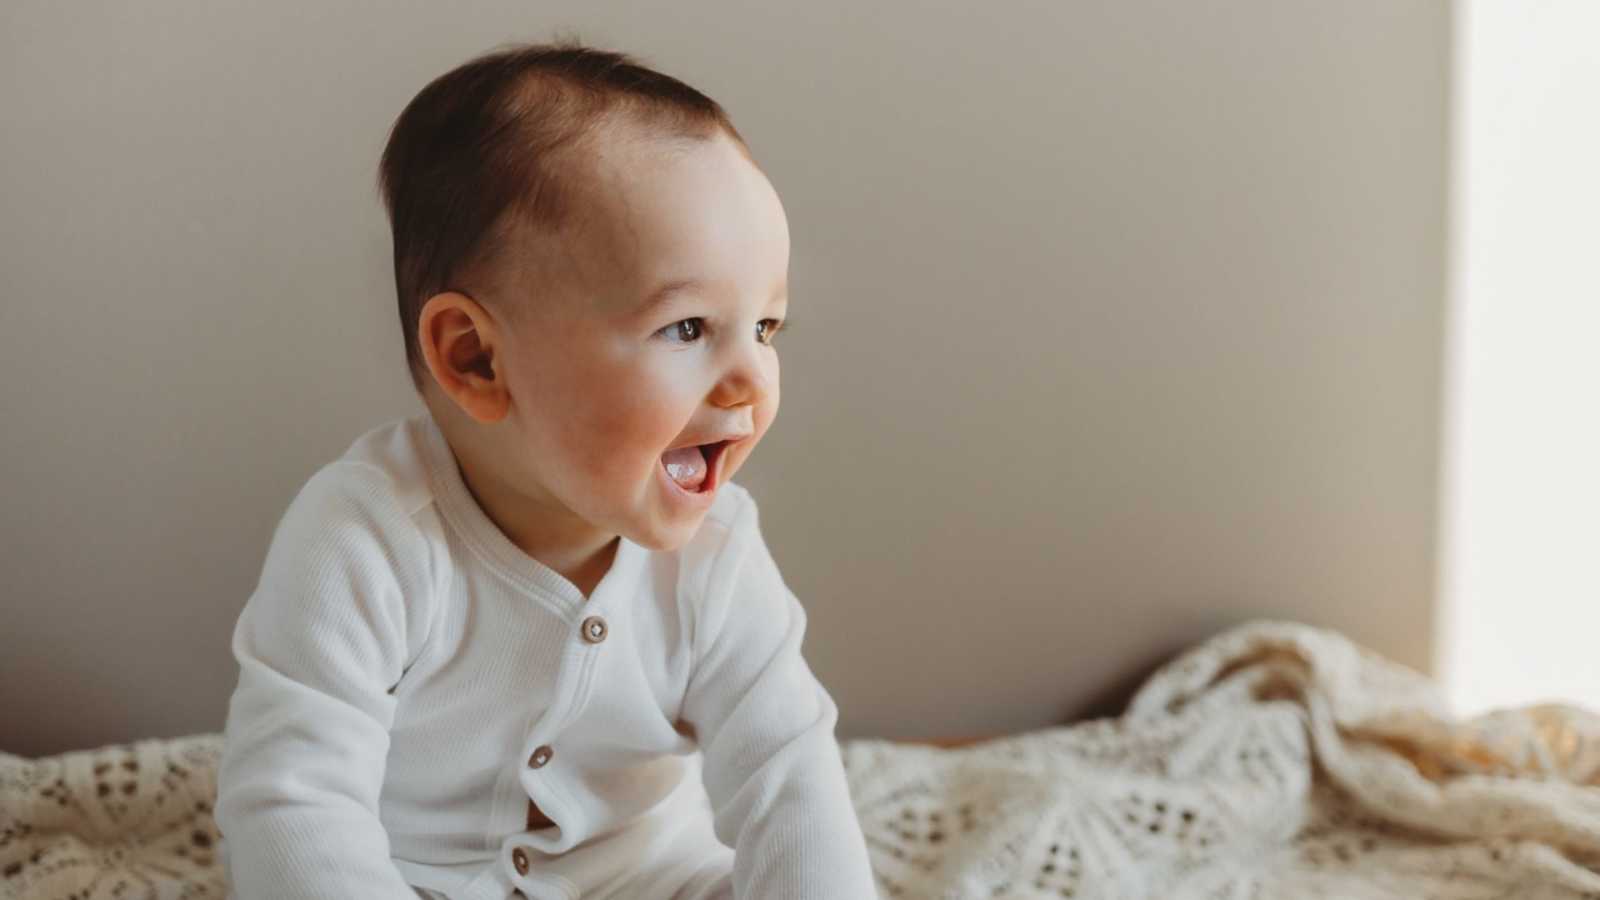 Young toddler gives a big, toothless grin during photoshoot